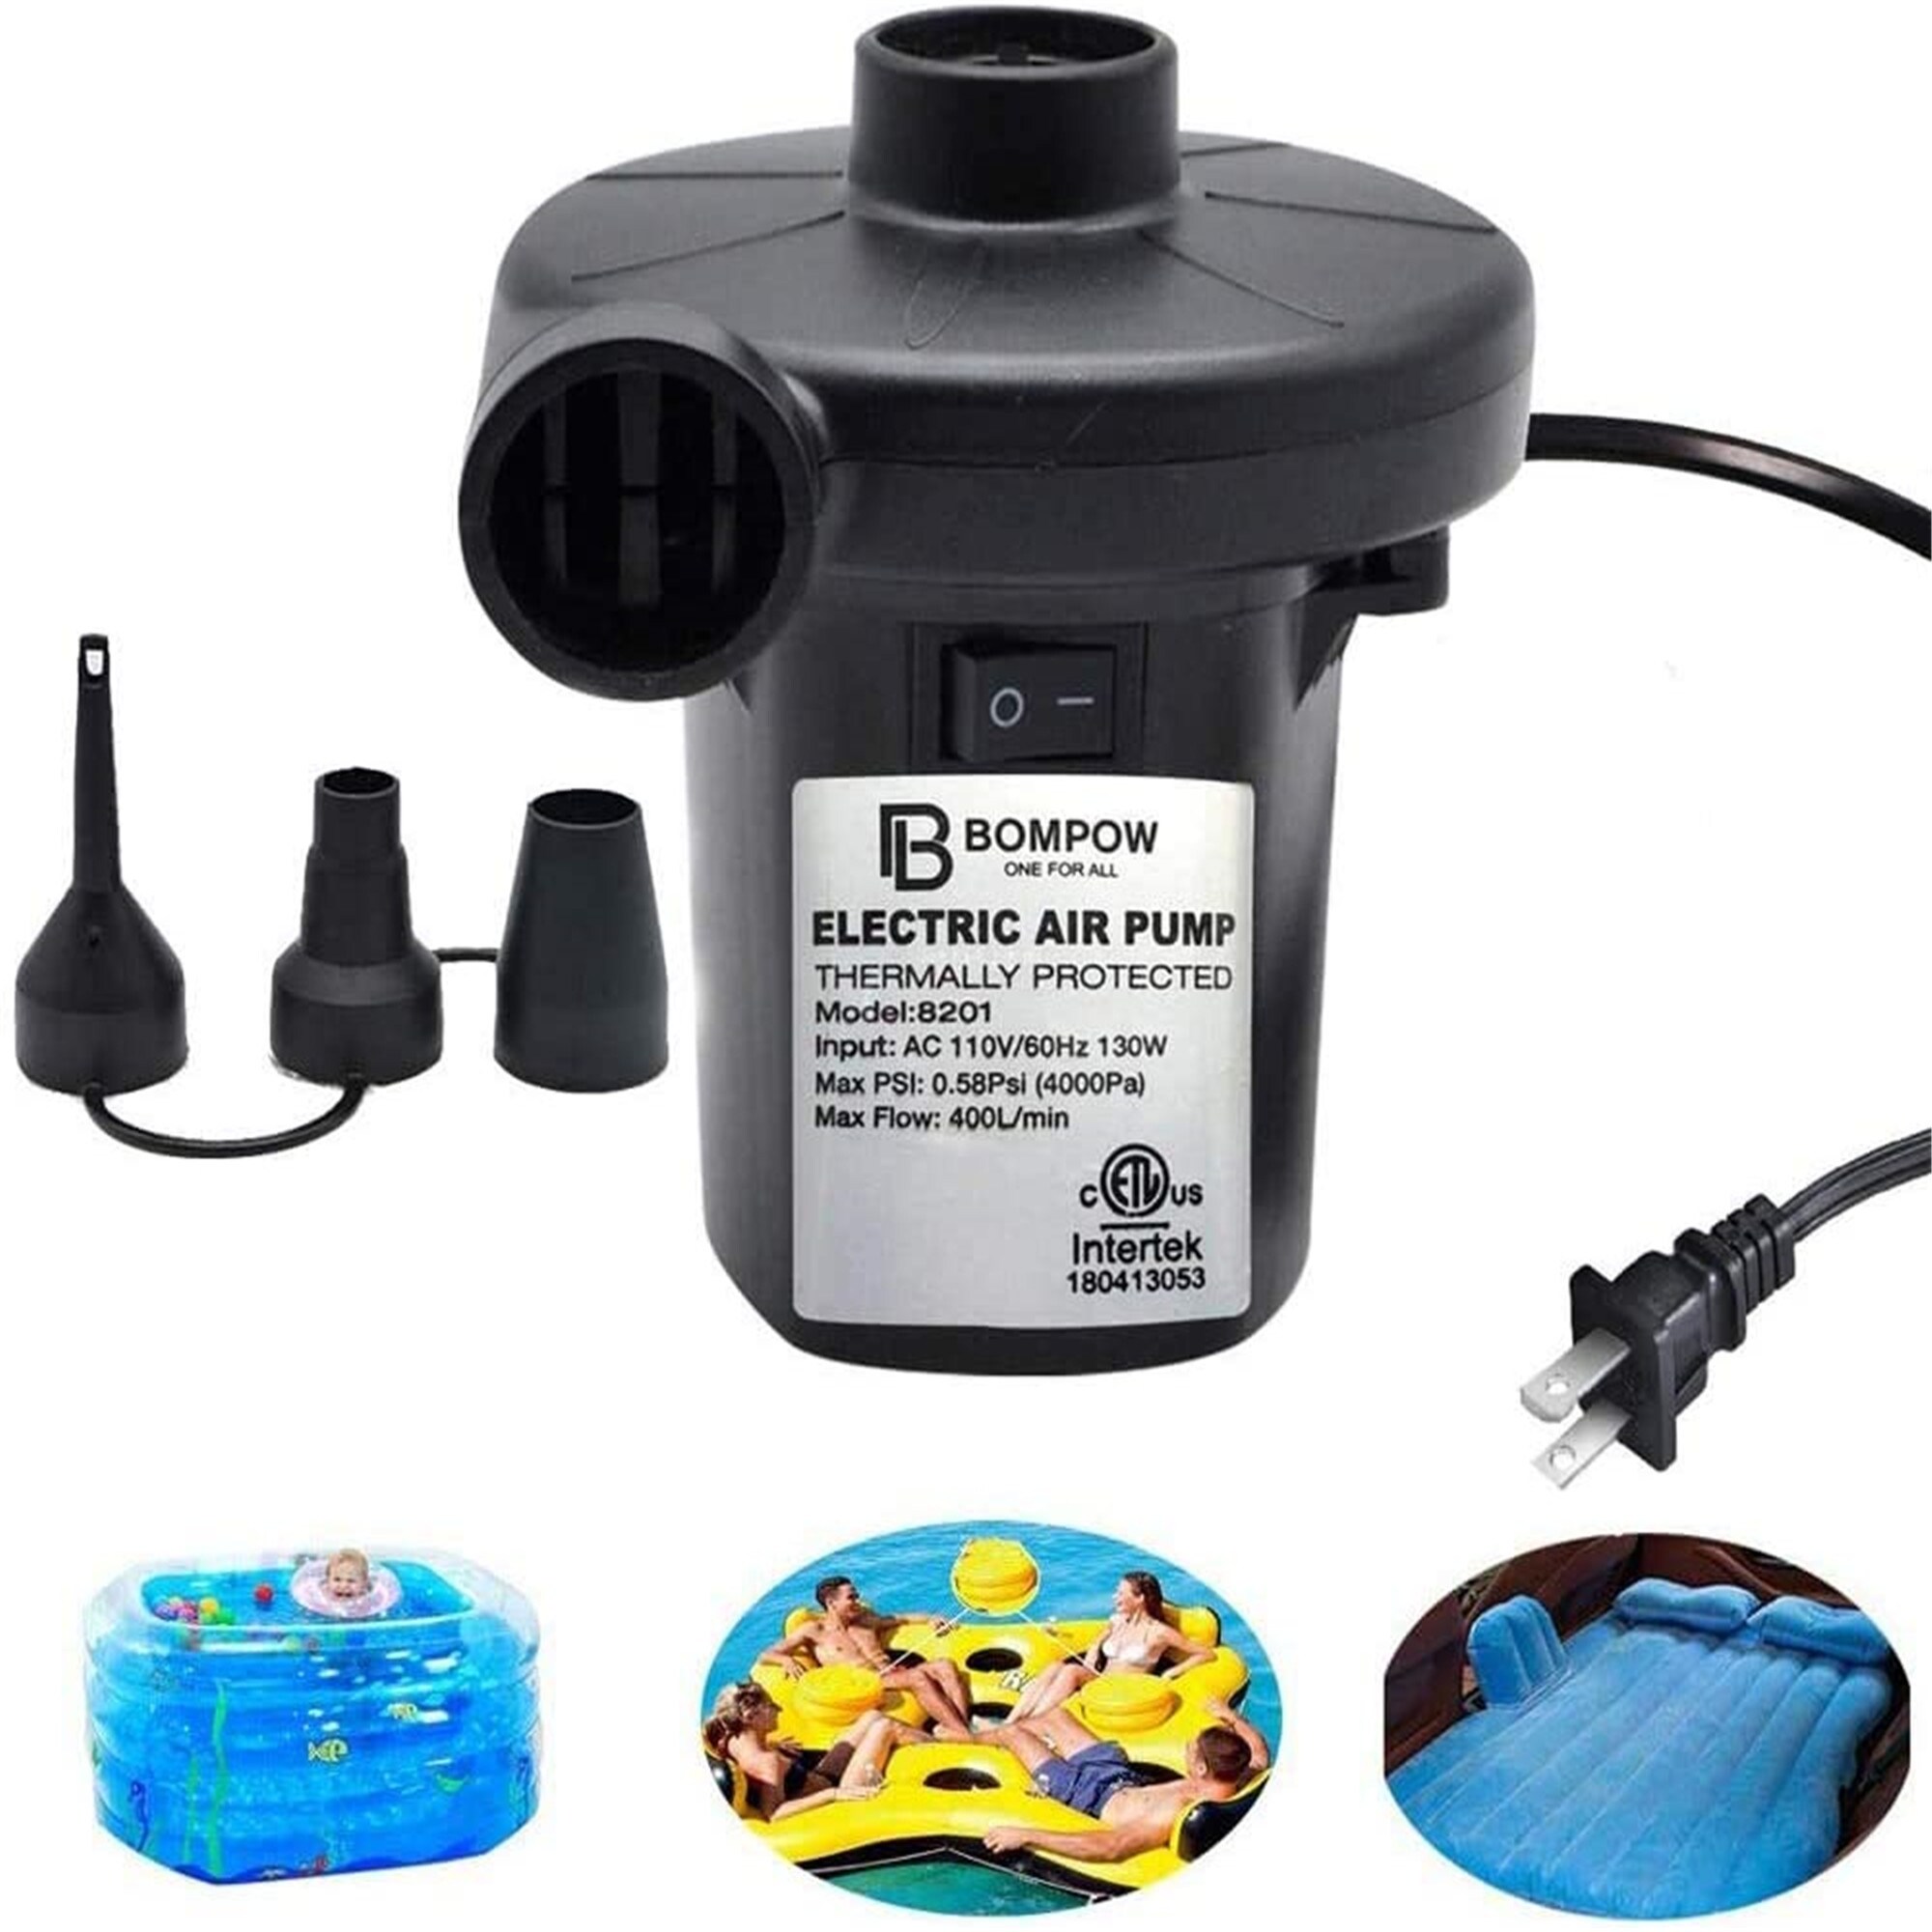 240V Electric Air Pump Inflator Inflatables Toy Bed Pool Raft Boat Air Mattress